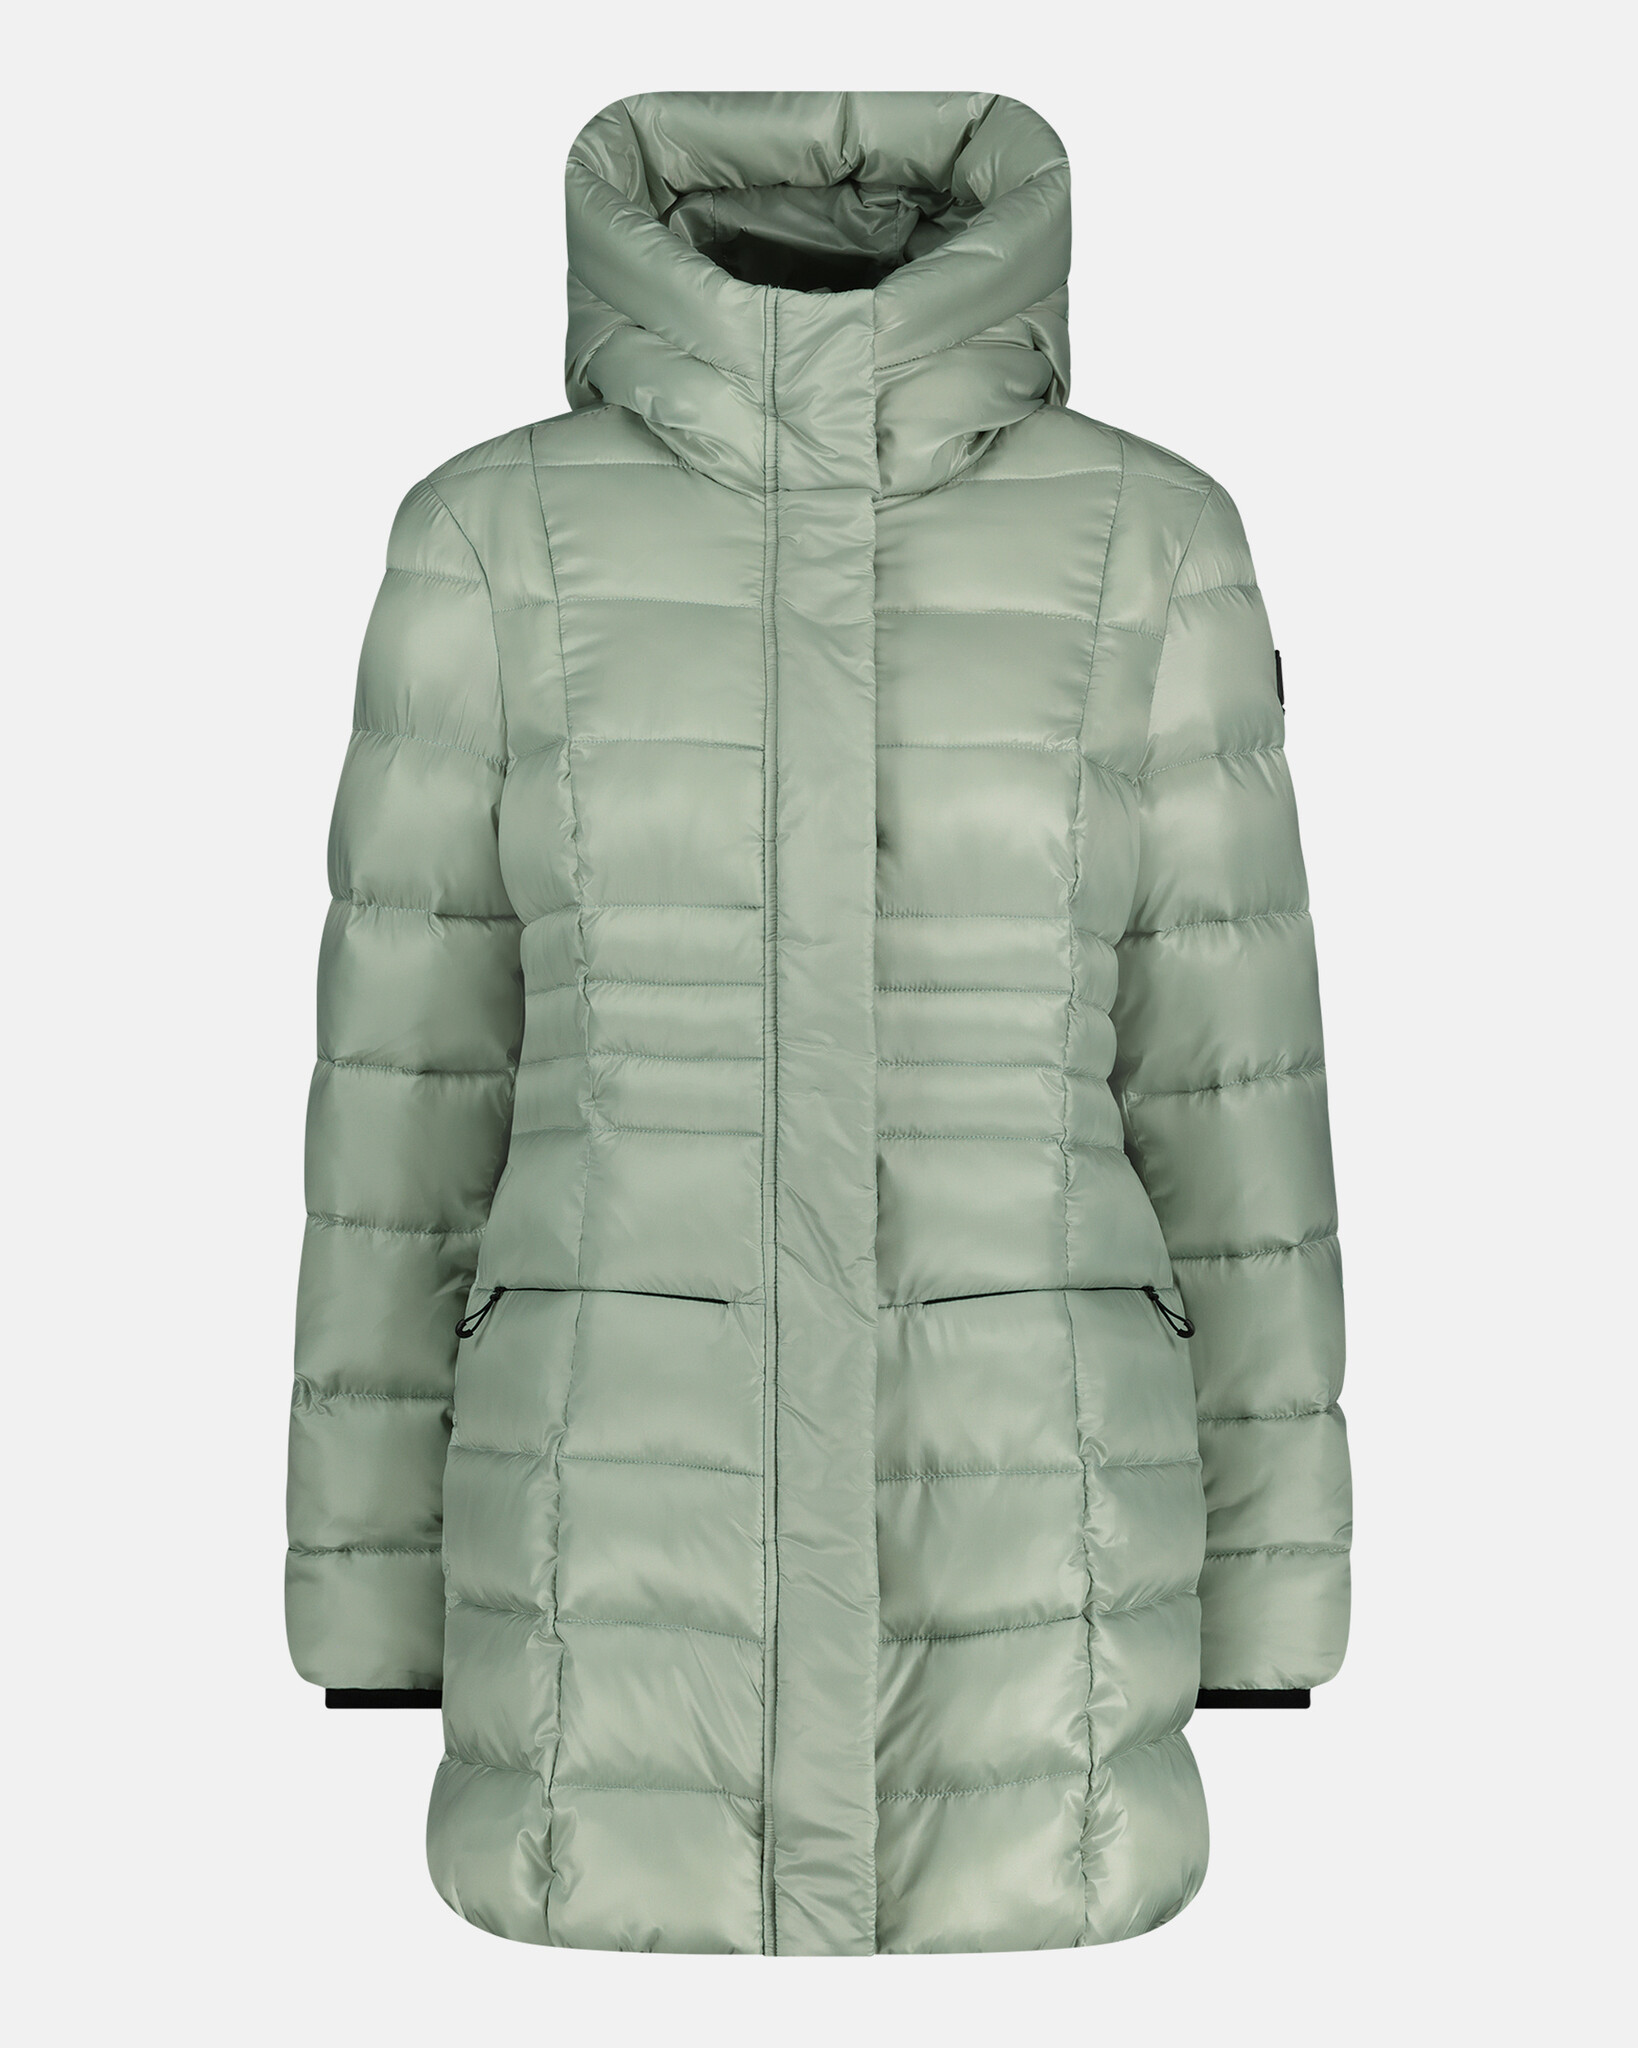 Puffer parka with 100% recycled fabric, REPREVE®  filling and water repelent finish